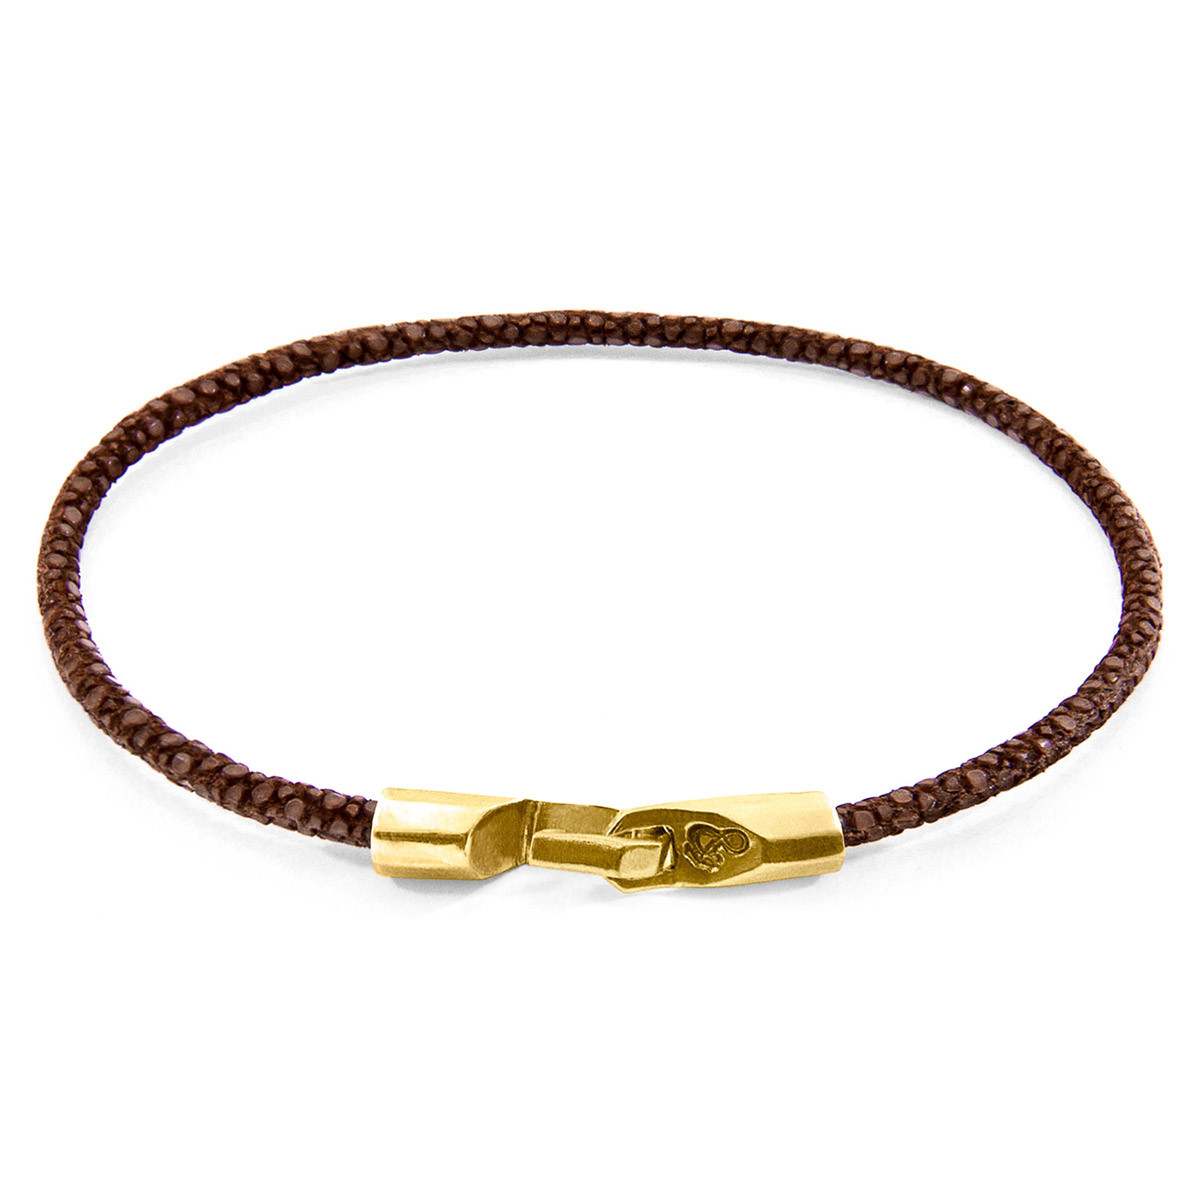 Mocha Brown Talbot 9ct Yellow Gold and Stingray Leather Bracelet